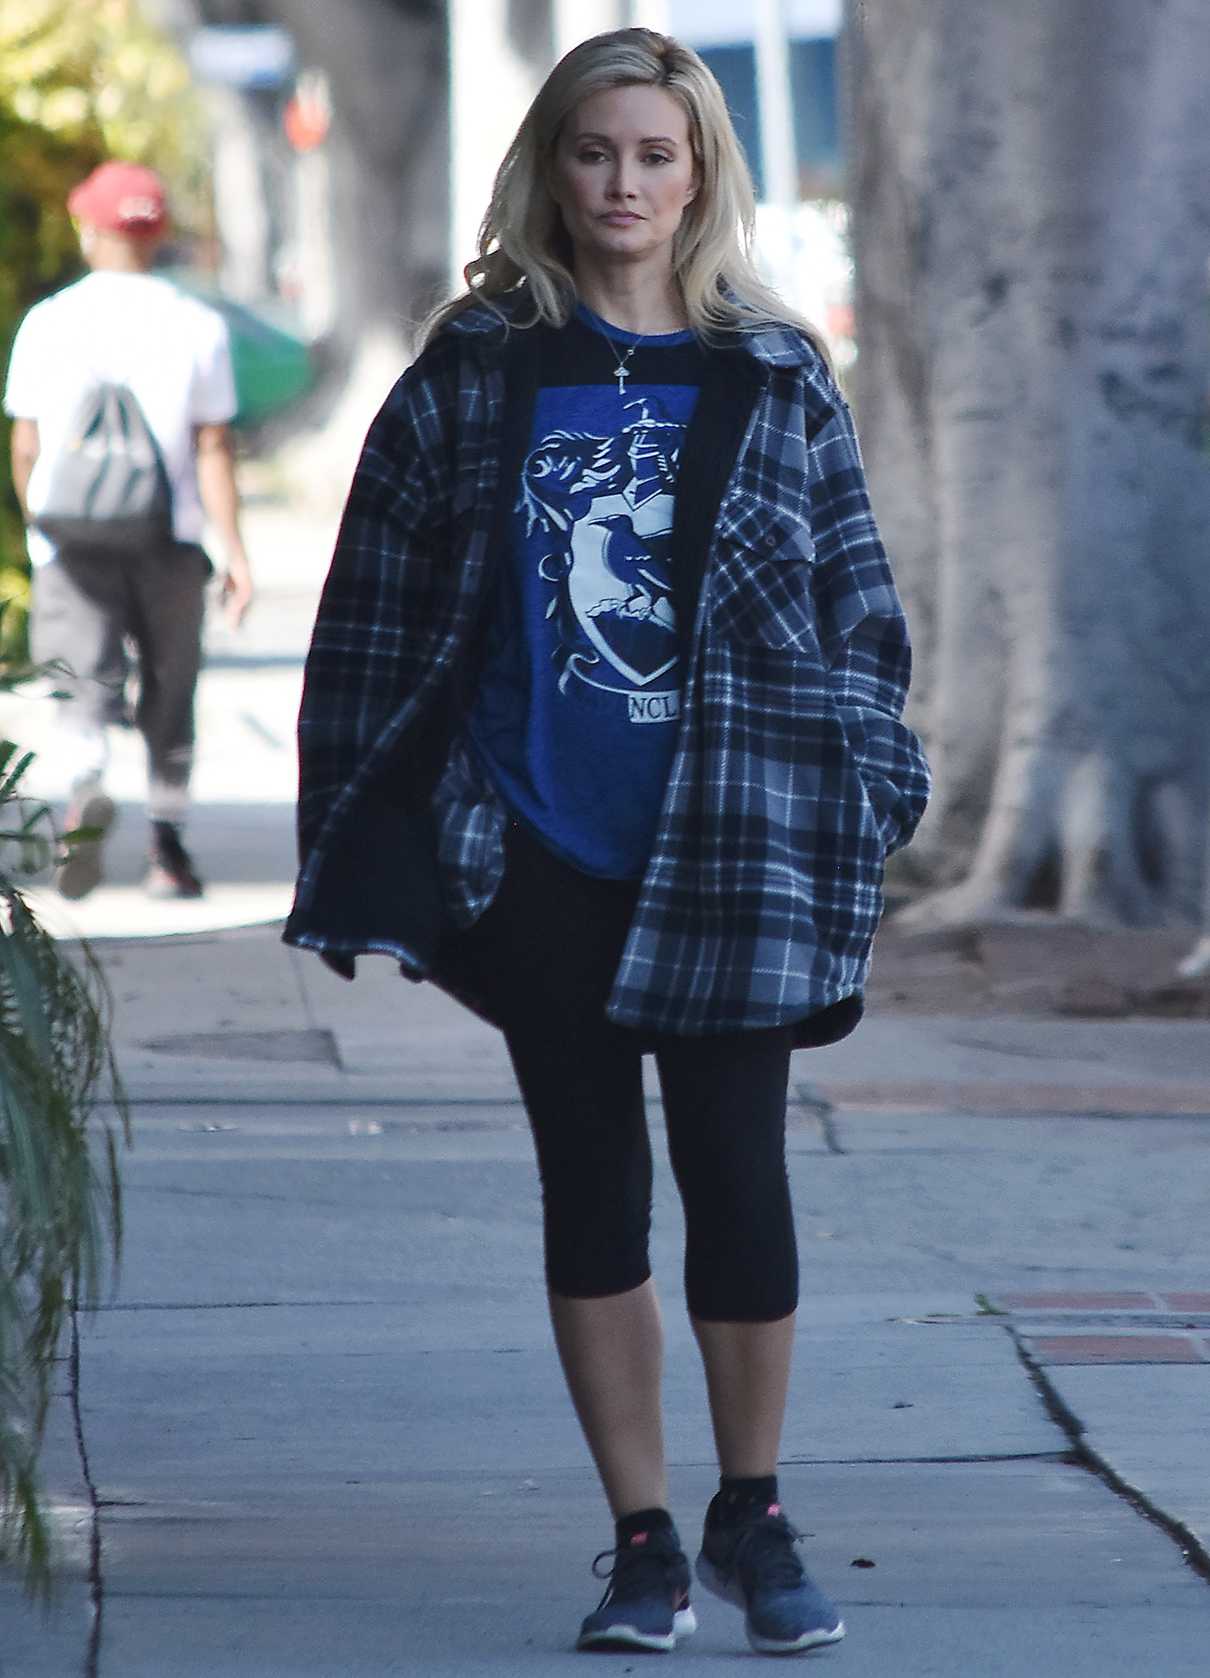 Holly Madison in a Plaid Jacket